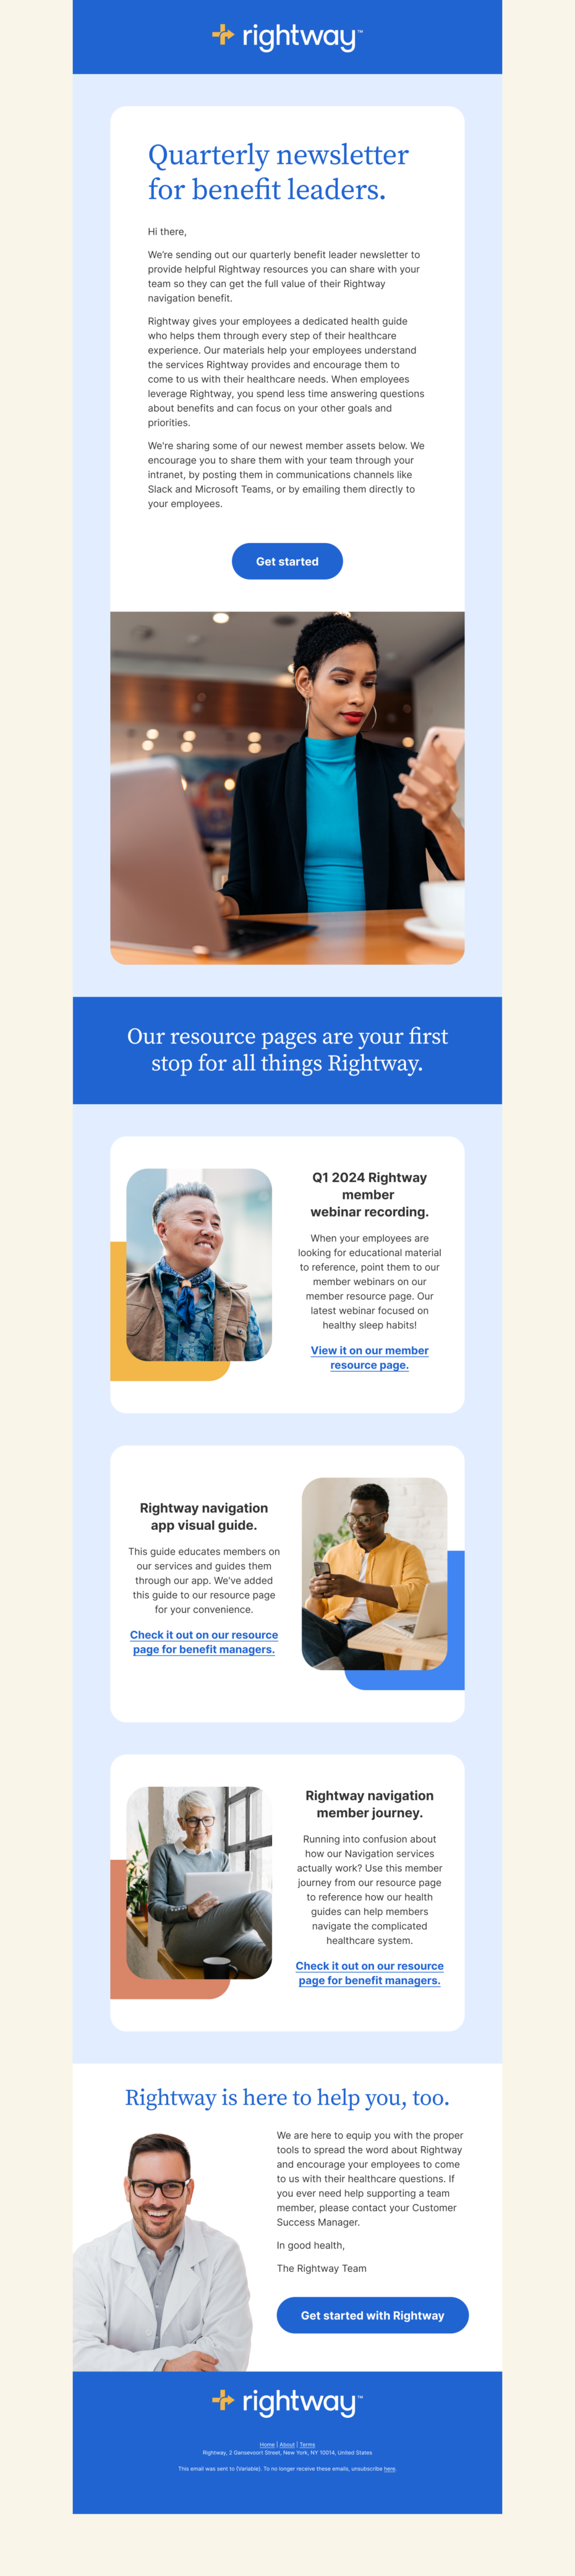 Rightway Benefit Manager Email Concept 1